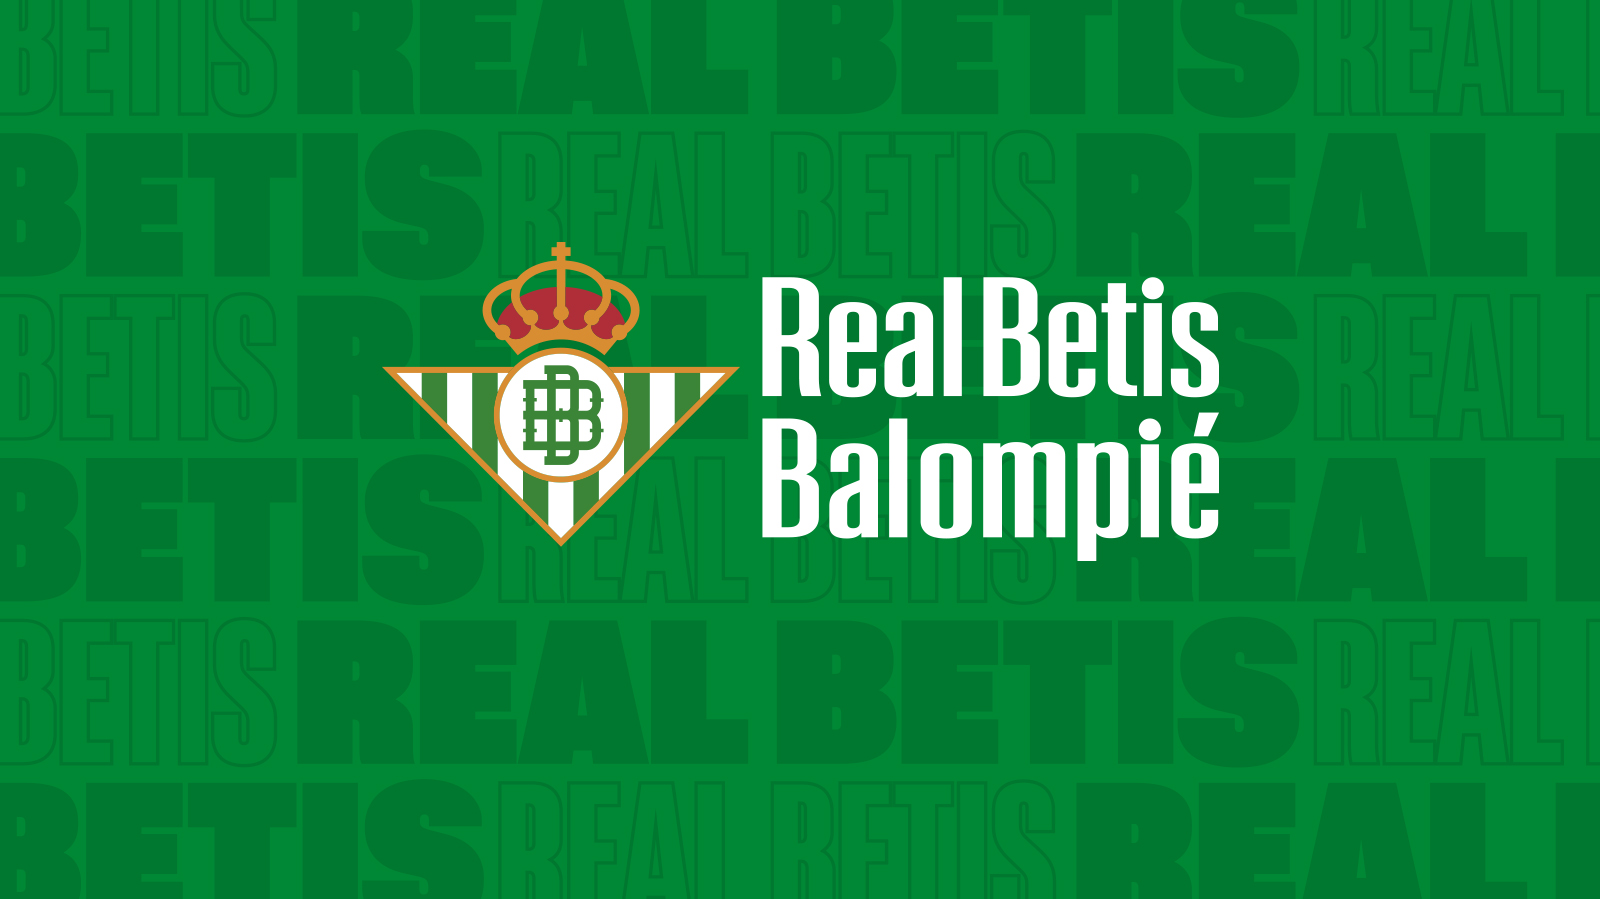 Statement from Real Betis Balompié - Real Betis Balompié